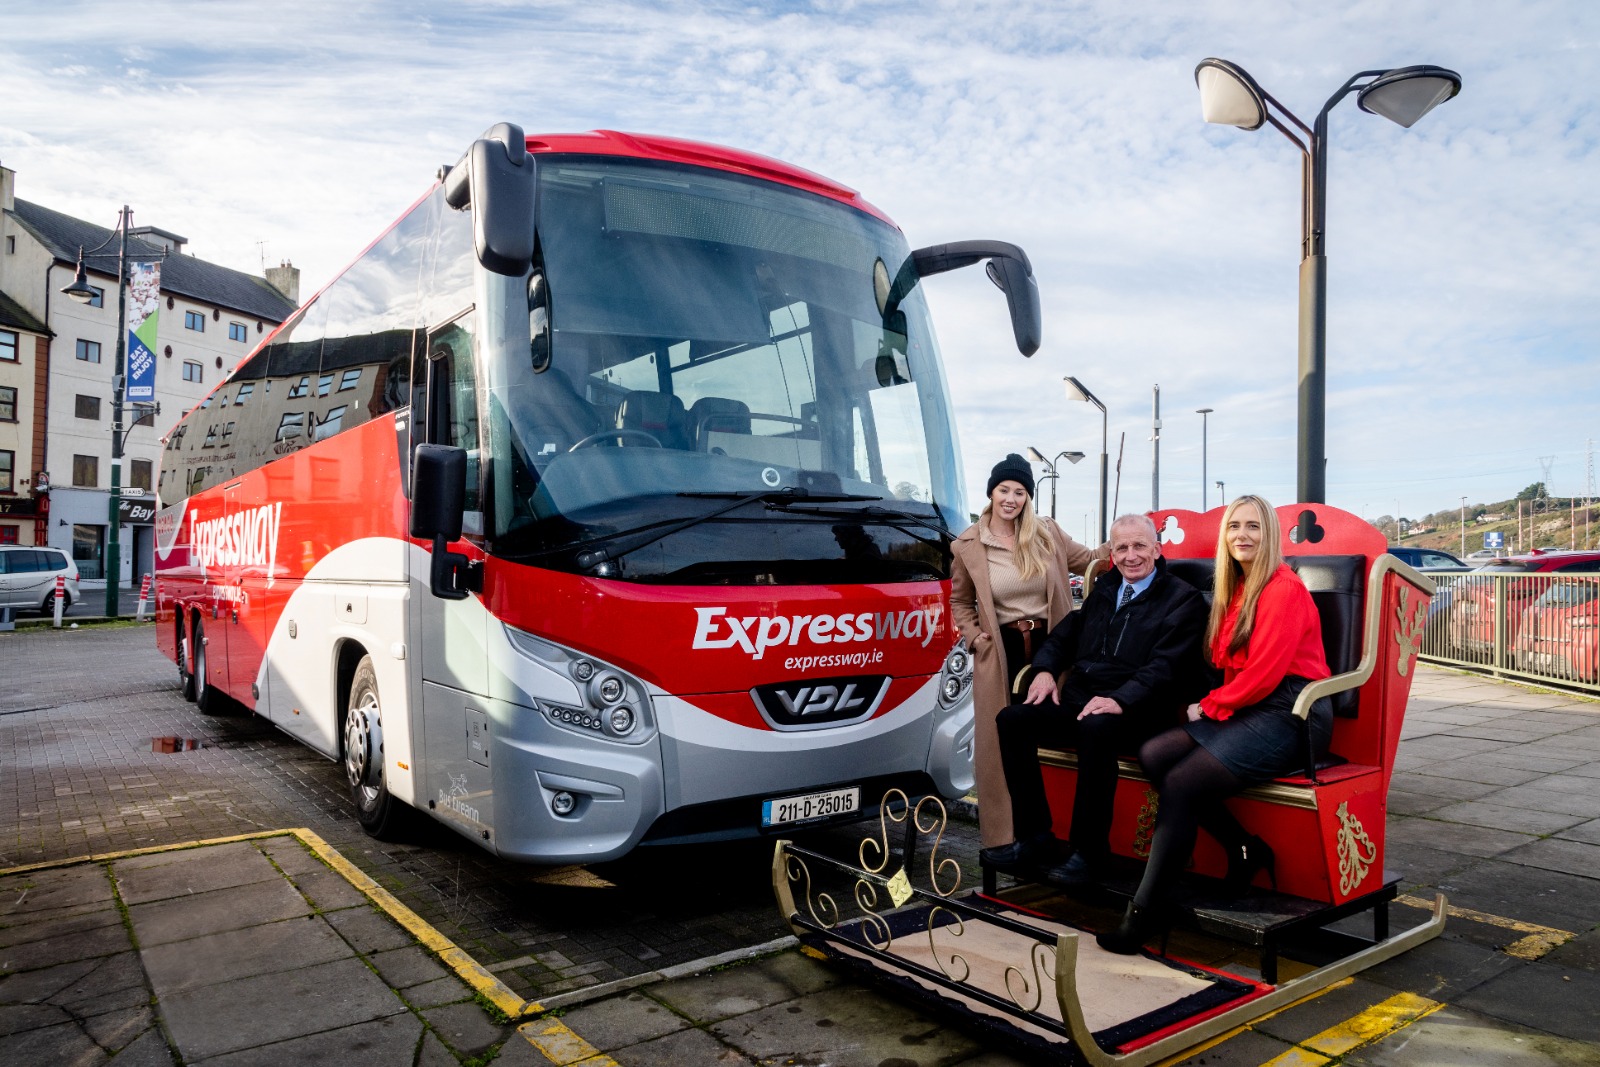 Bus Éireann’s Expressway encourages passengers to get the coach when travelling to Winterval